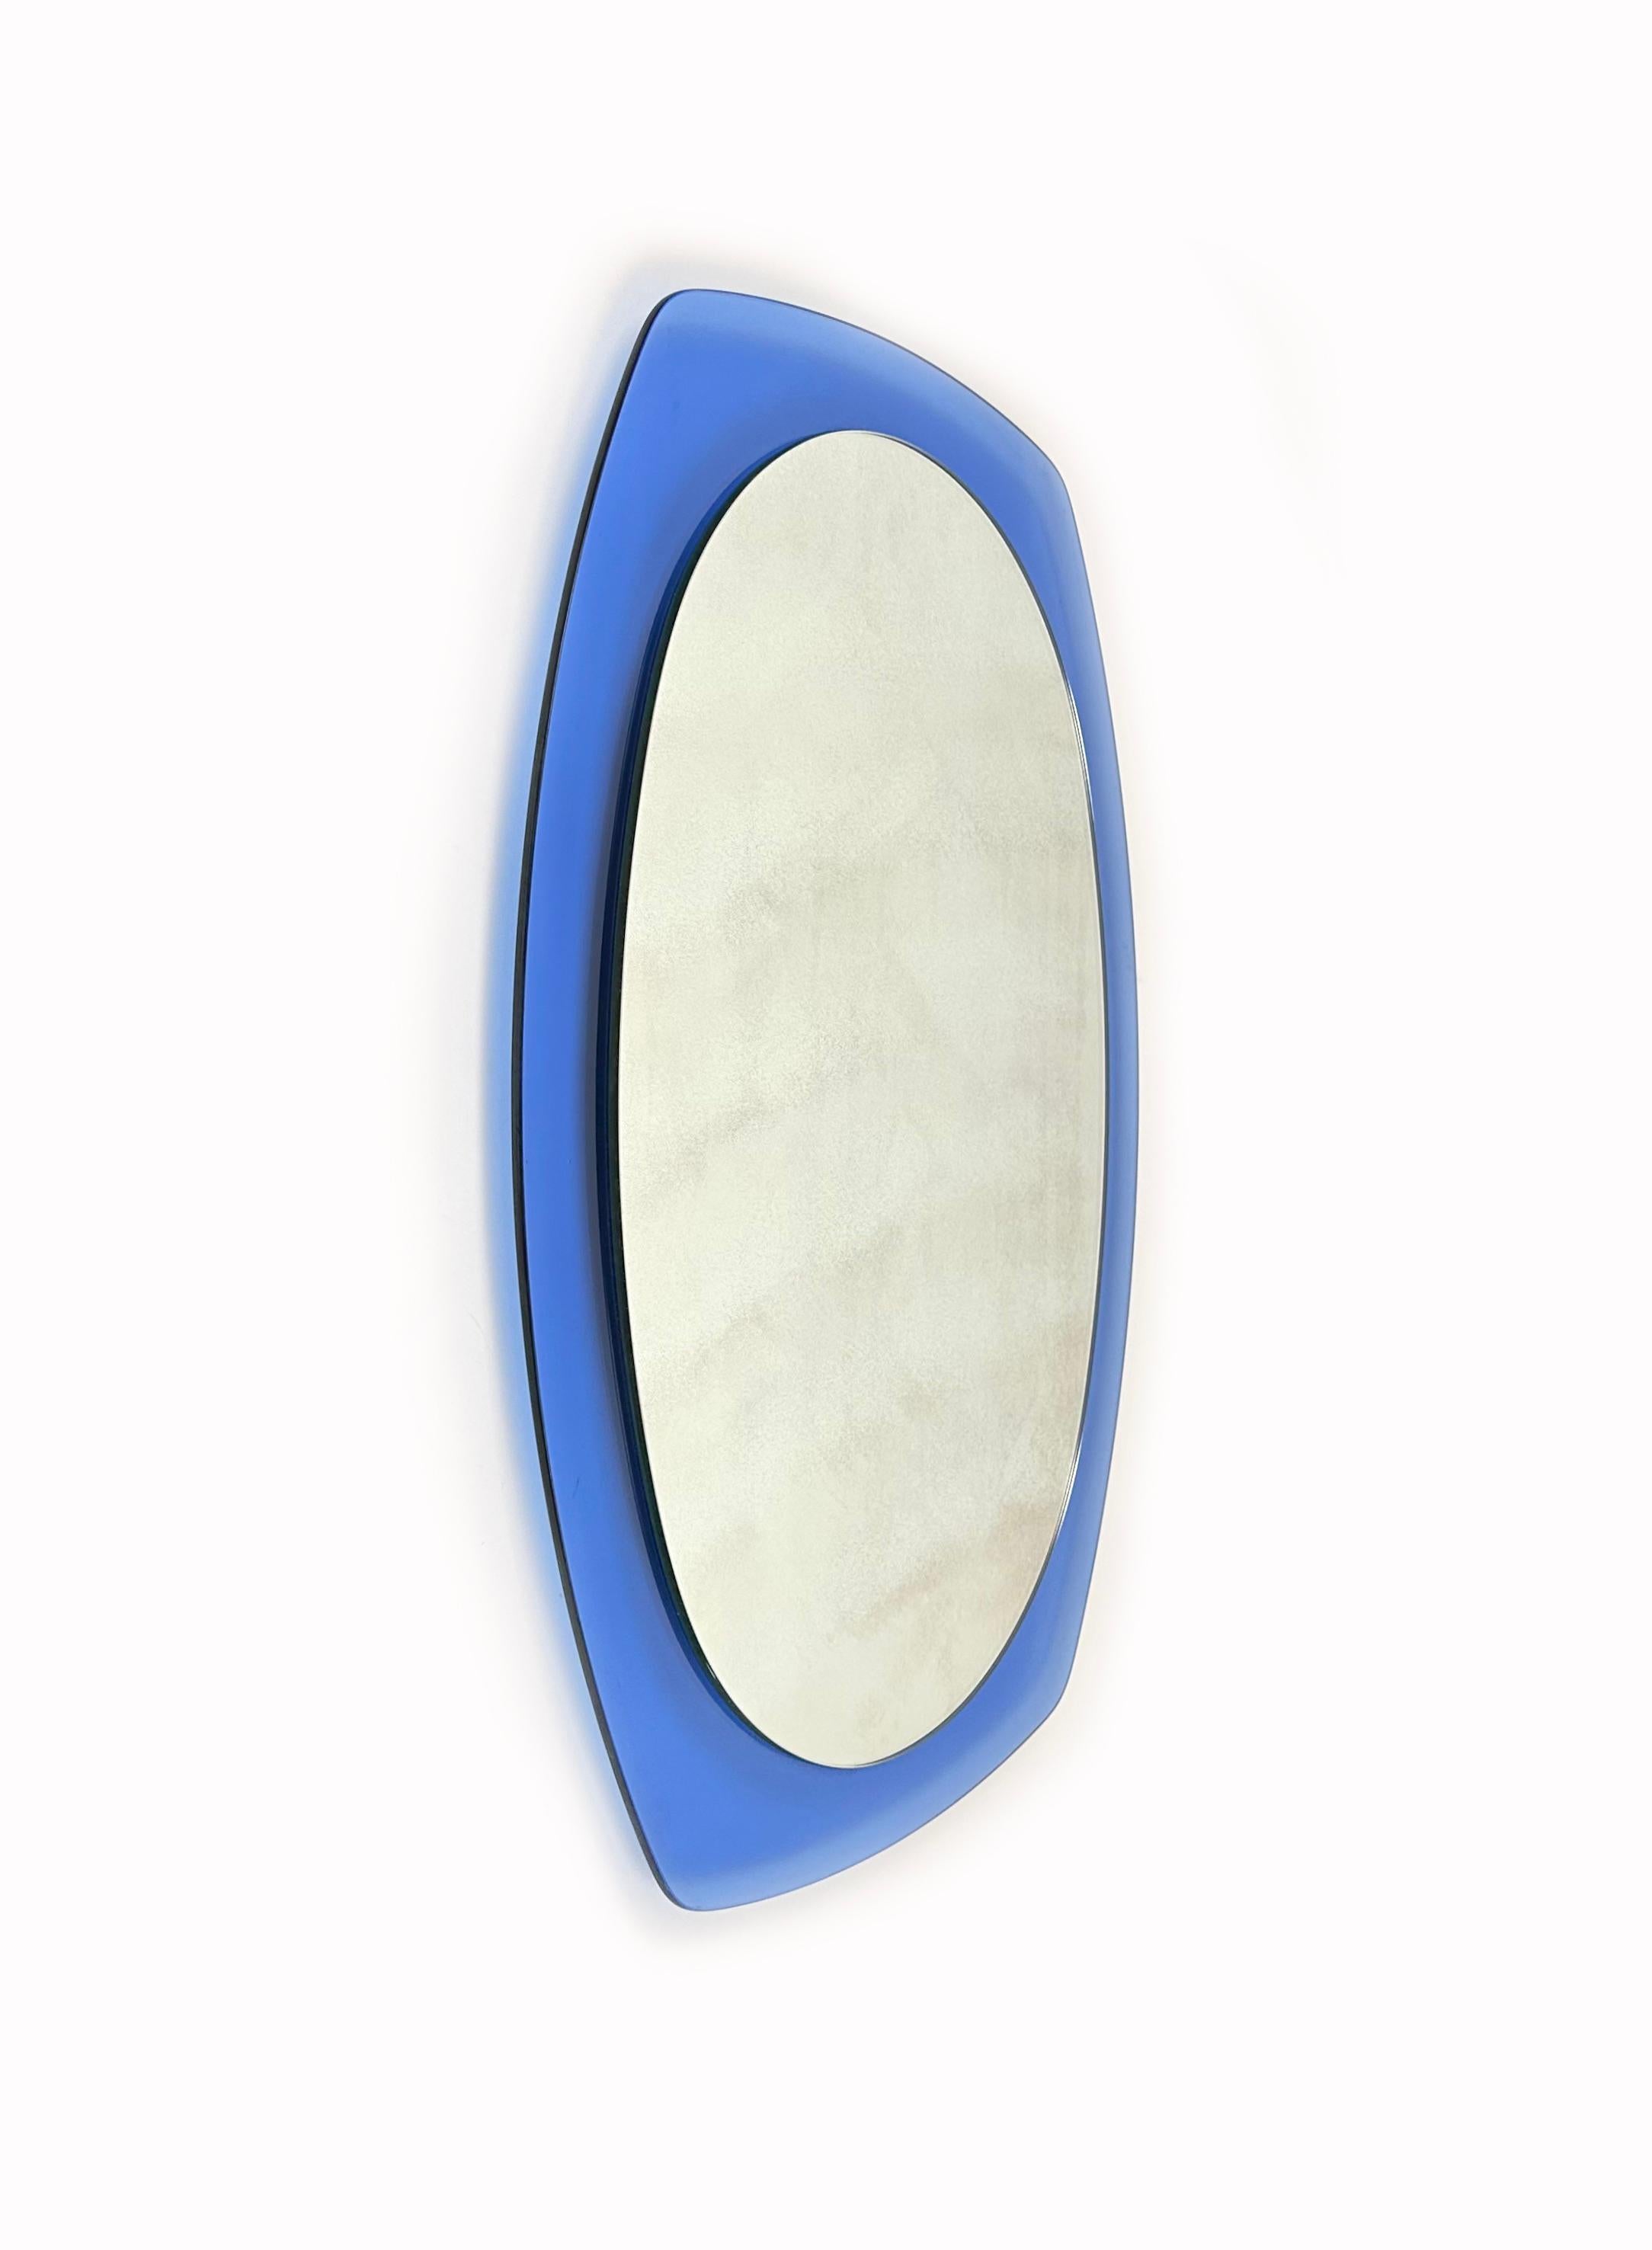 Italian Midcentury Wall Mirror Blue Glass by Veca, Italy, 1970s For Sale